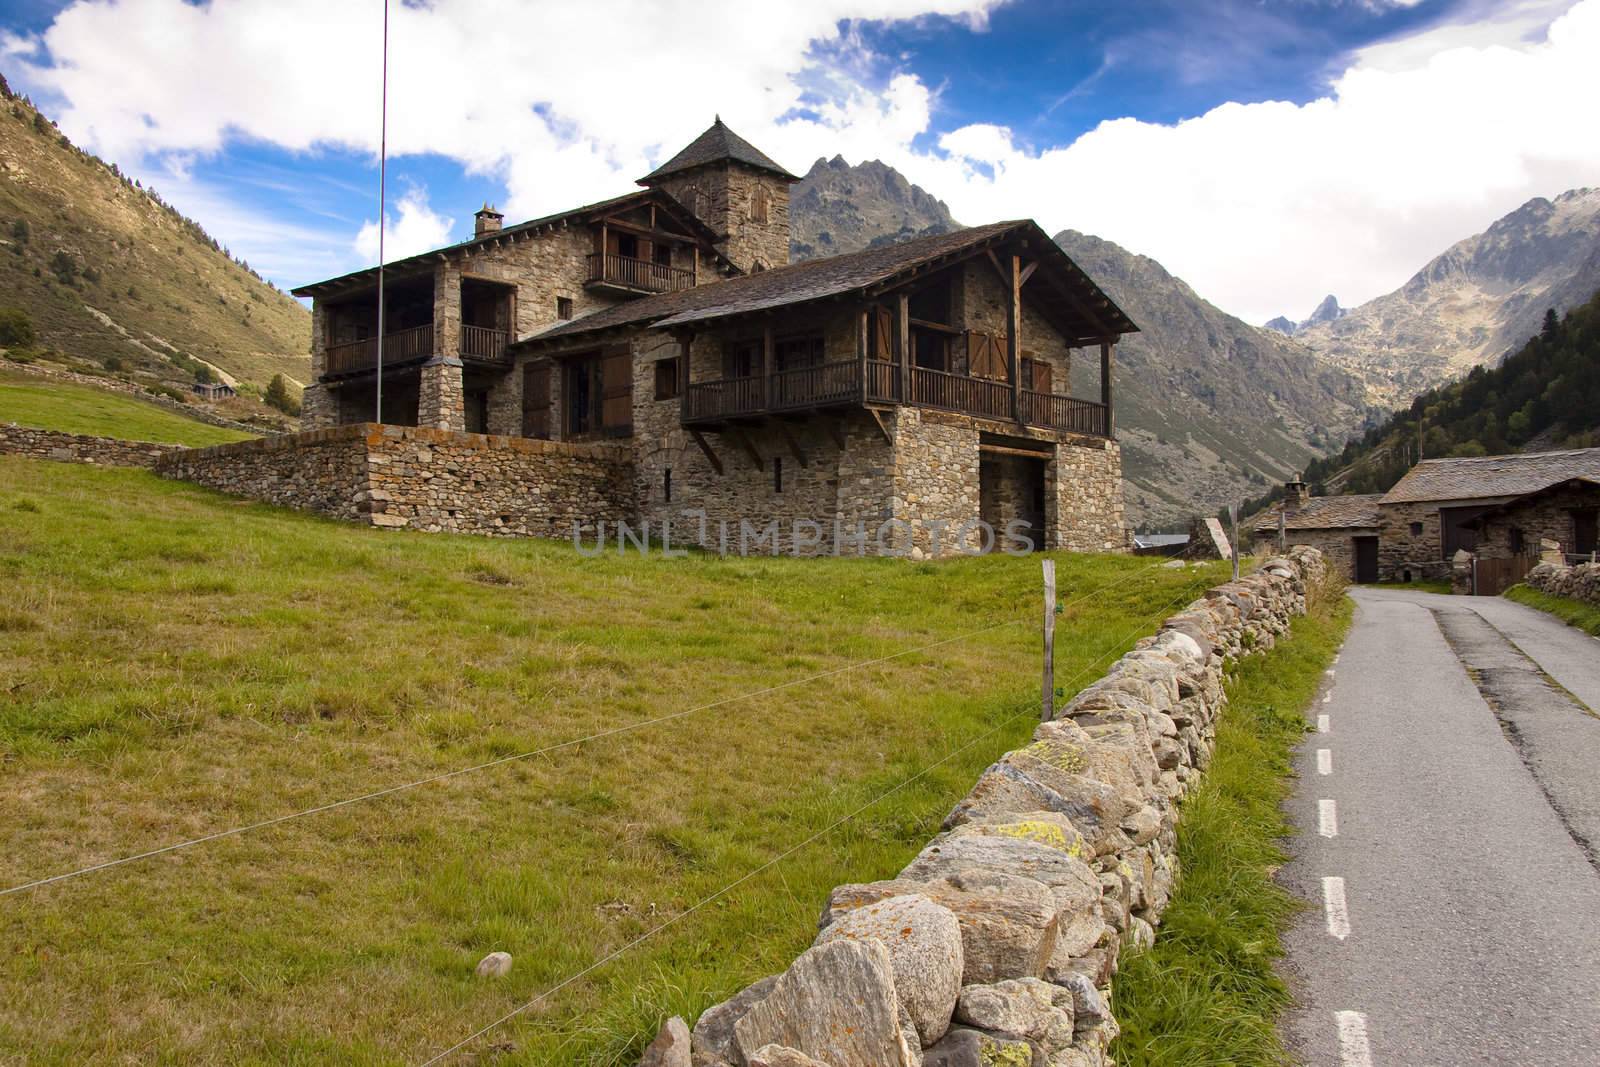 Big stony house in Pyrenees mountain - Andorra summer day, blue sky.